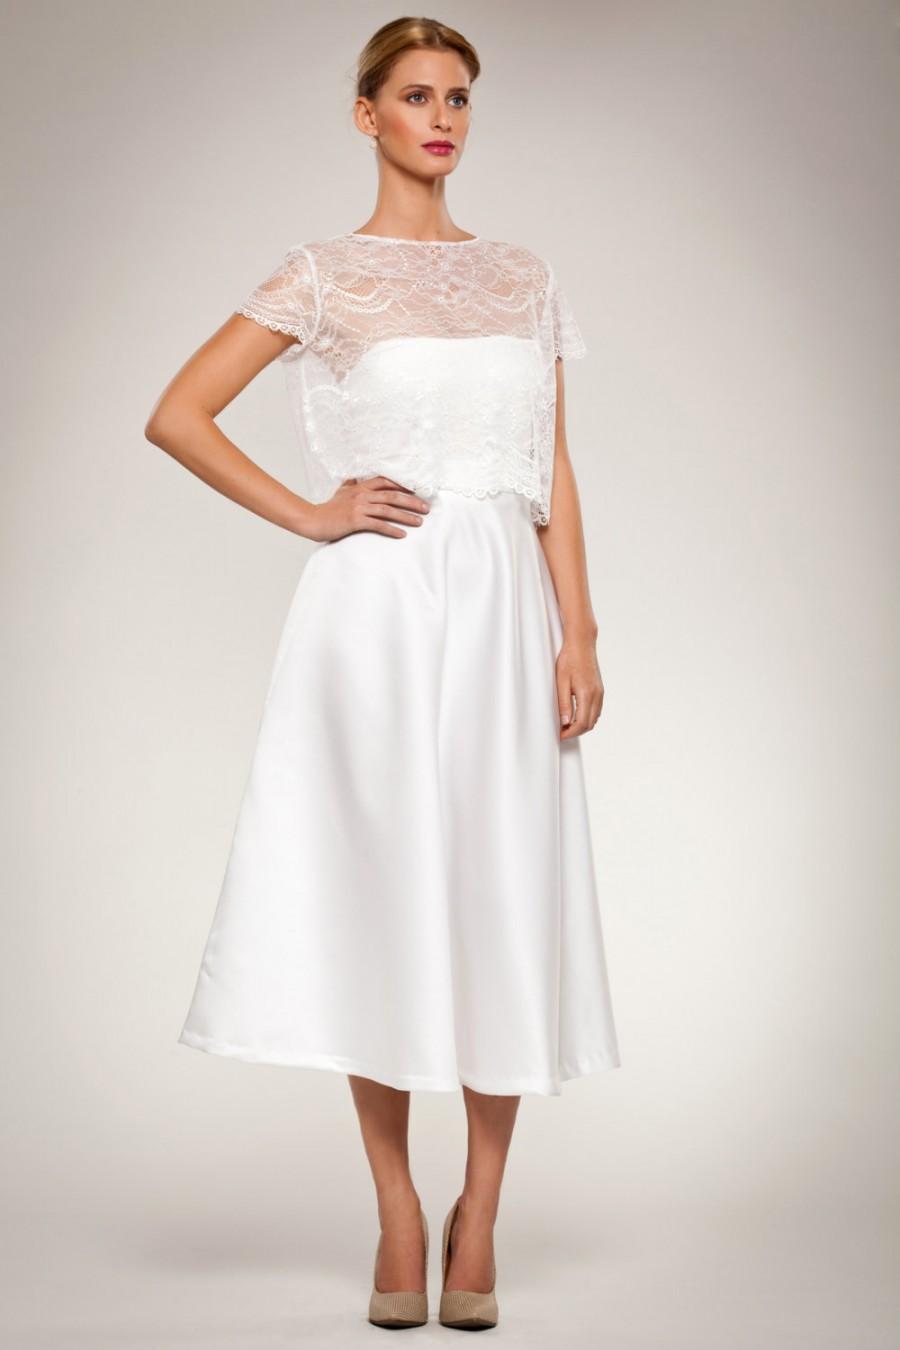 Wedding Gown Dress Set- Cropped Lace Short Sleeve Top With Scalloped ...